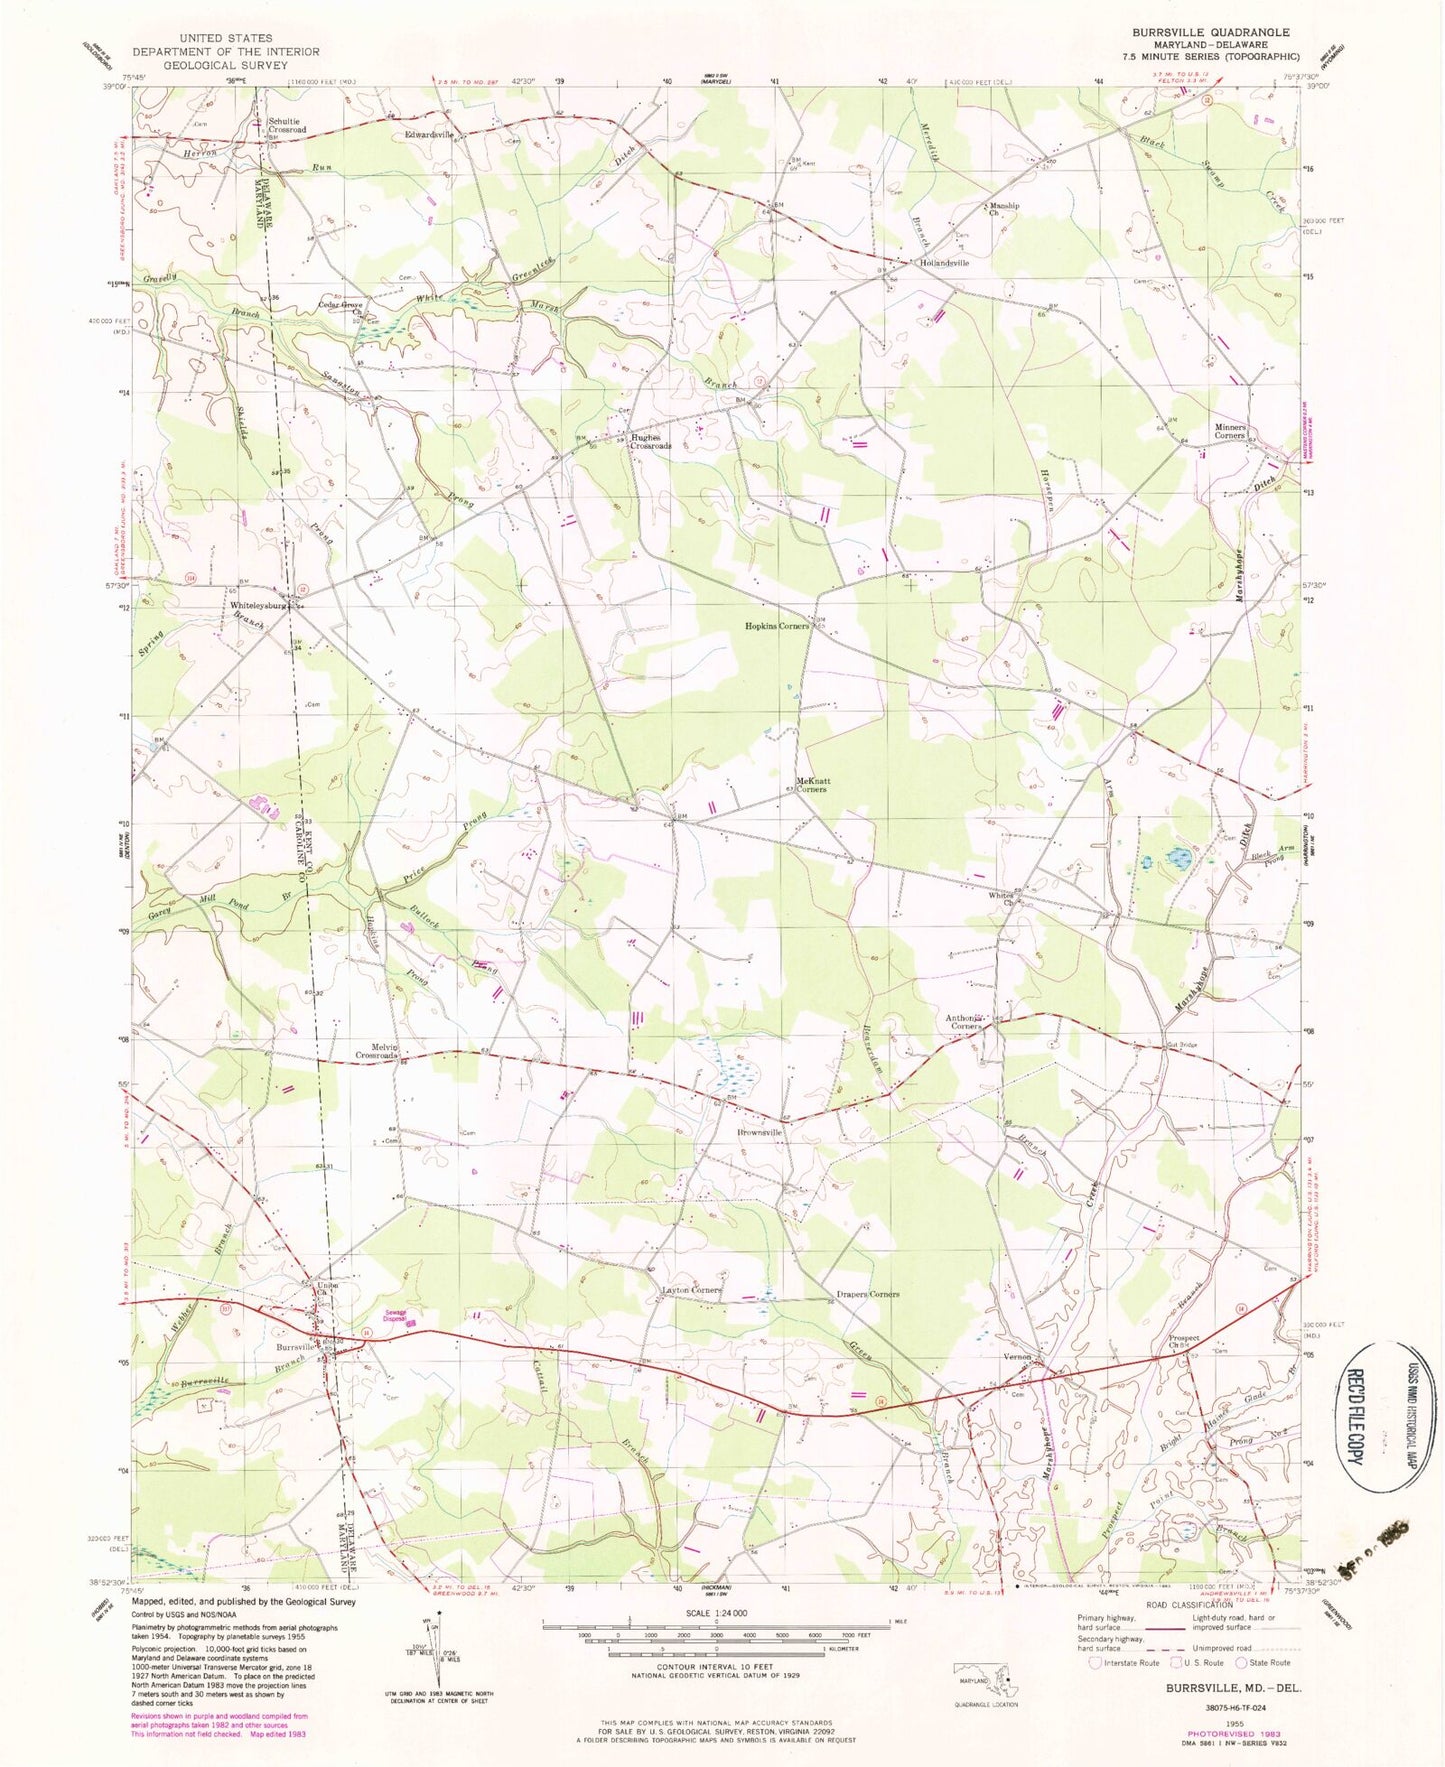 Classic USGS Burrsville Maryland 7.5'x7.5' Topo Map Image